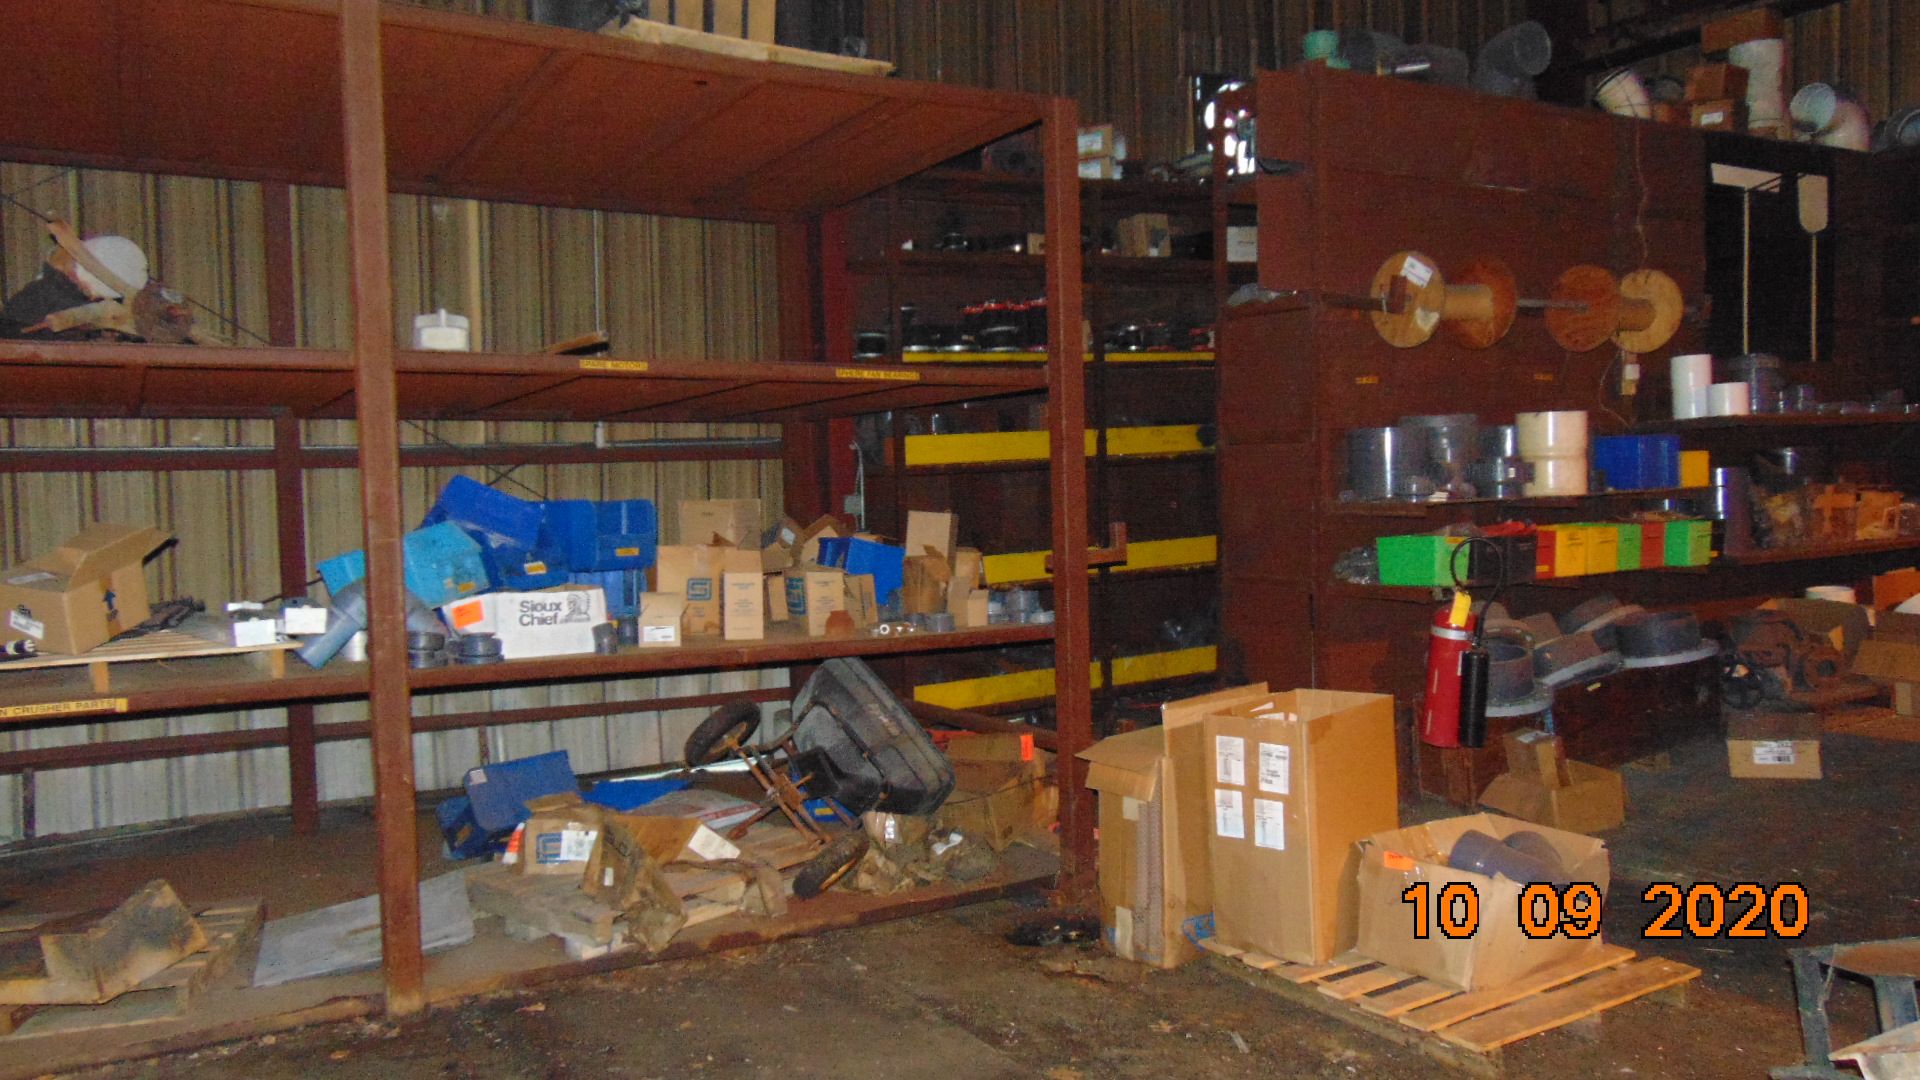 Contents in Trailer Repair Building and Attached Rear Building - Image 15 of 16